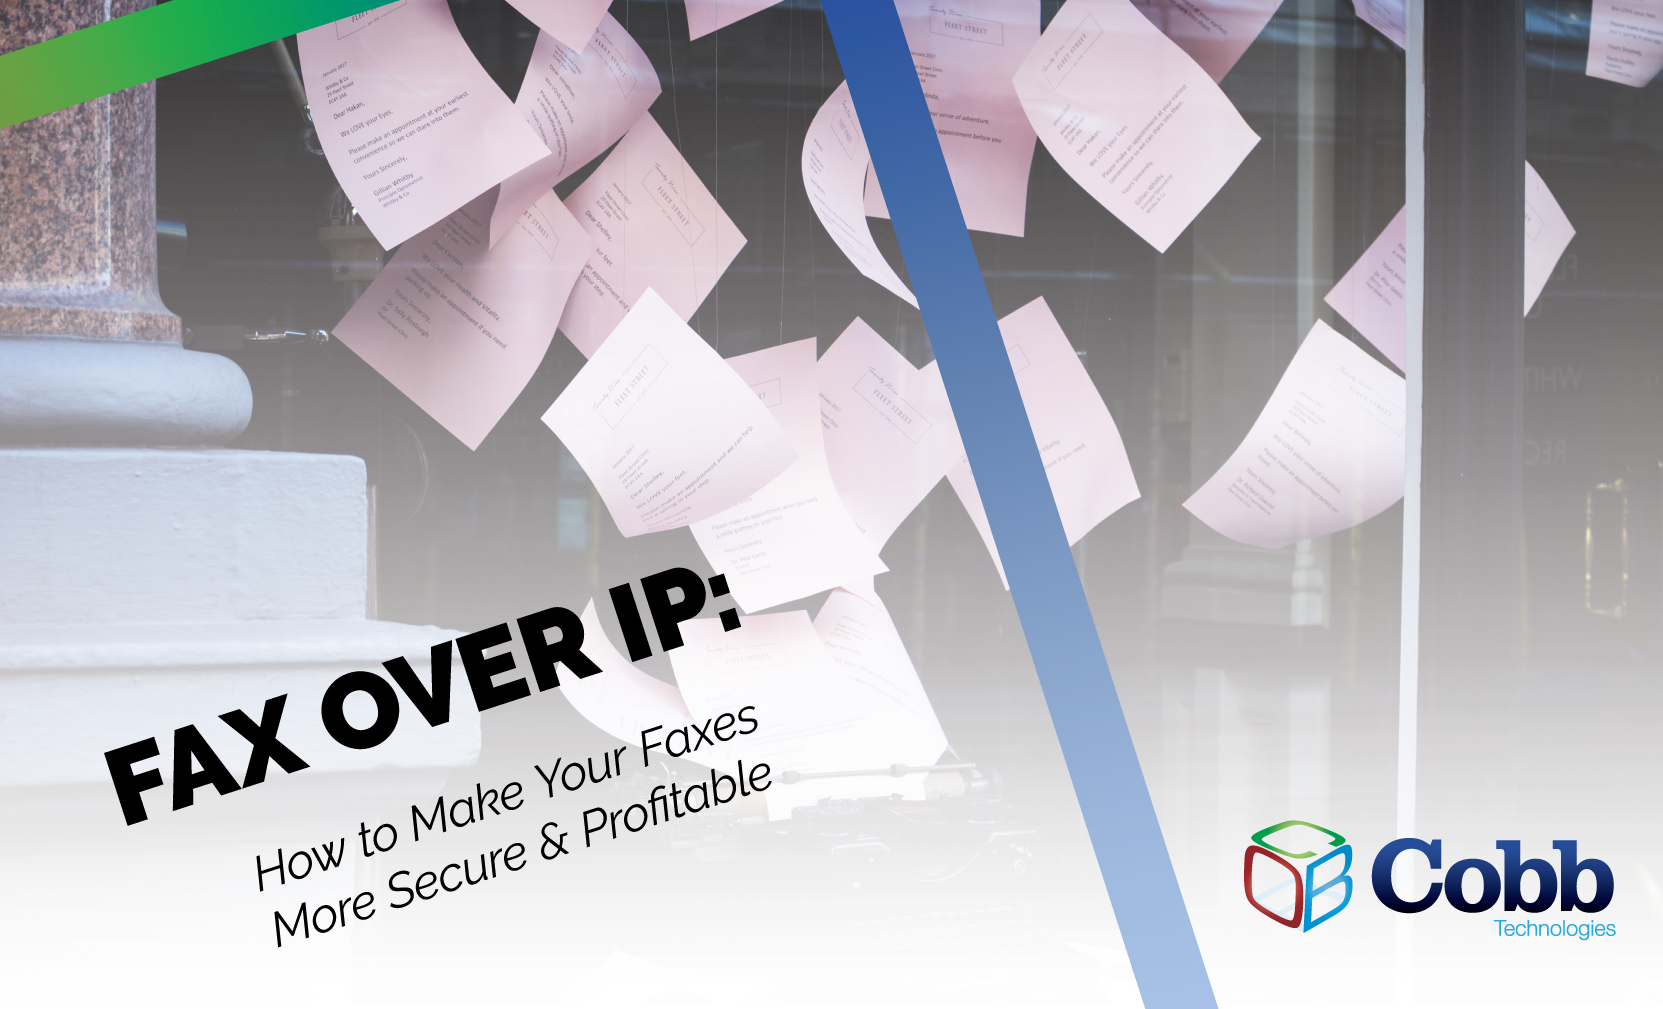 How Fax over IP Makes Your Faxes More Secure and Profitable